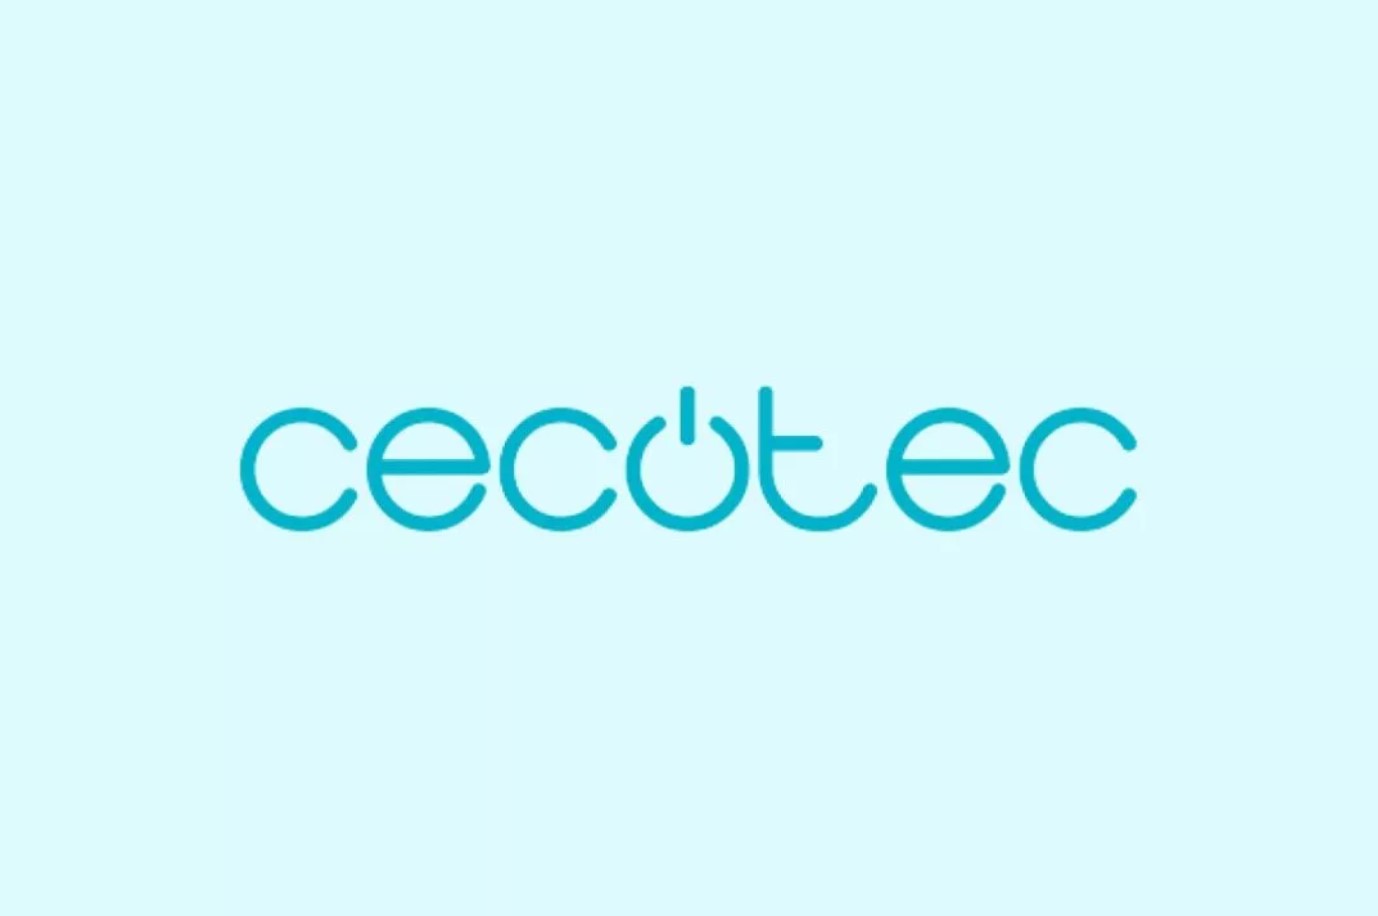 Cecotec Customer Service: Telephone, Contact And Support Email